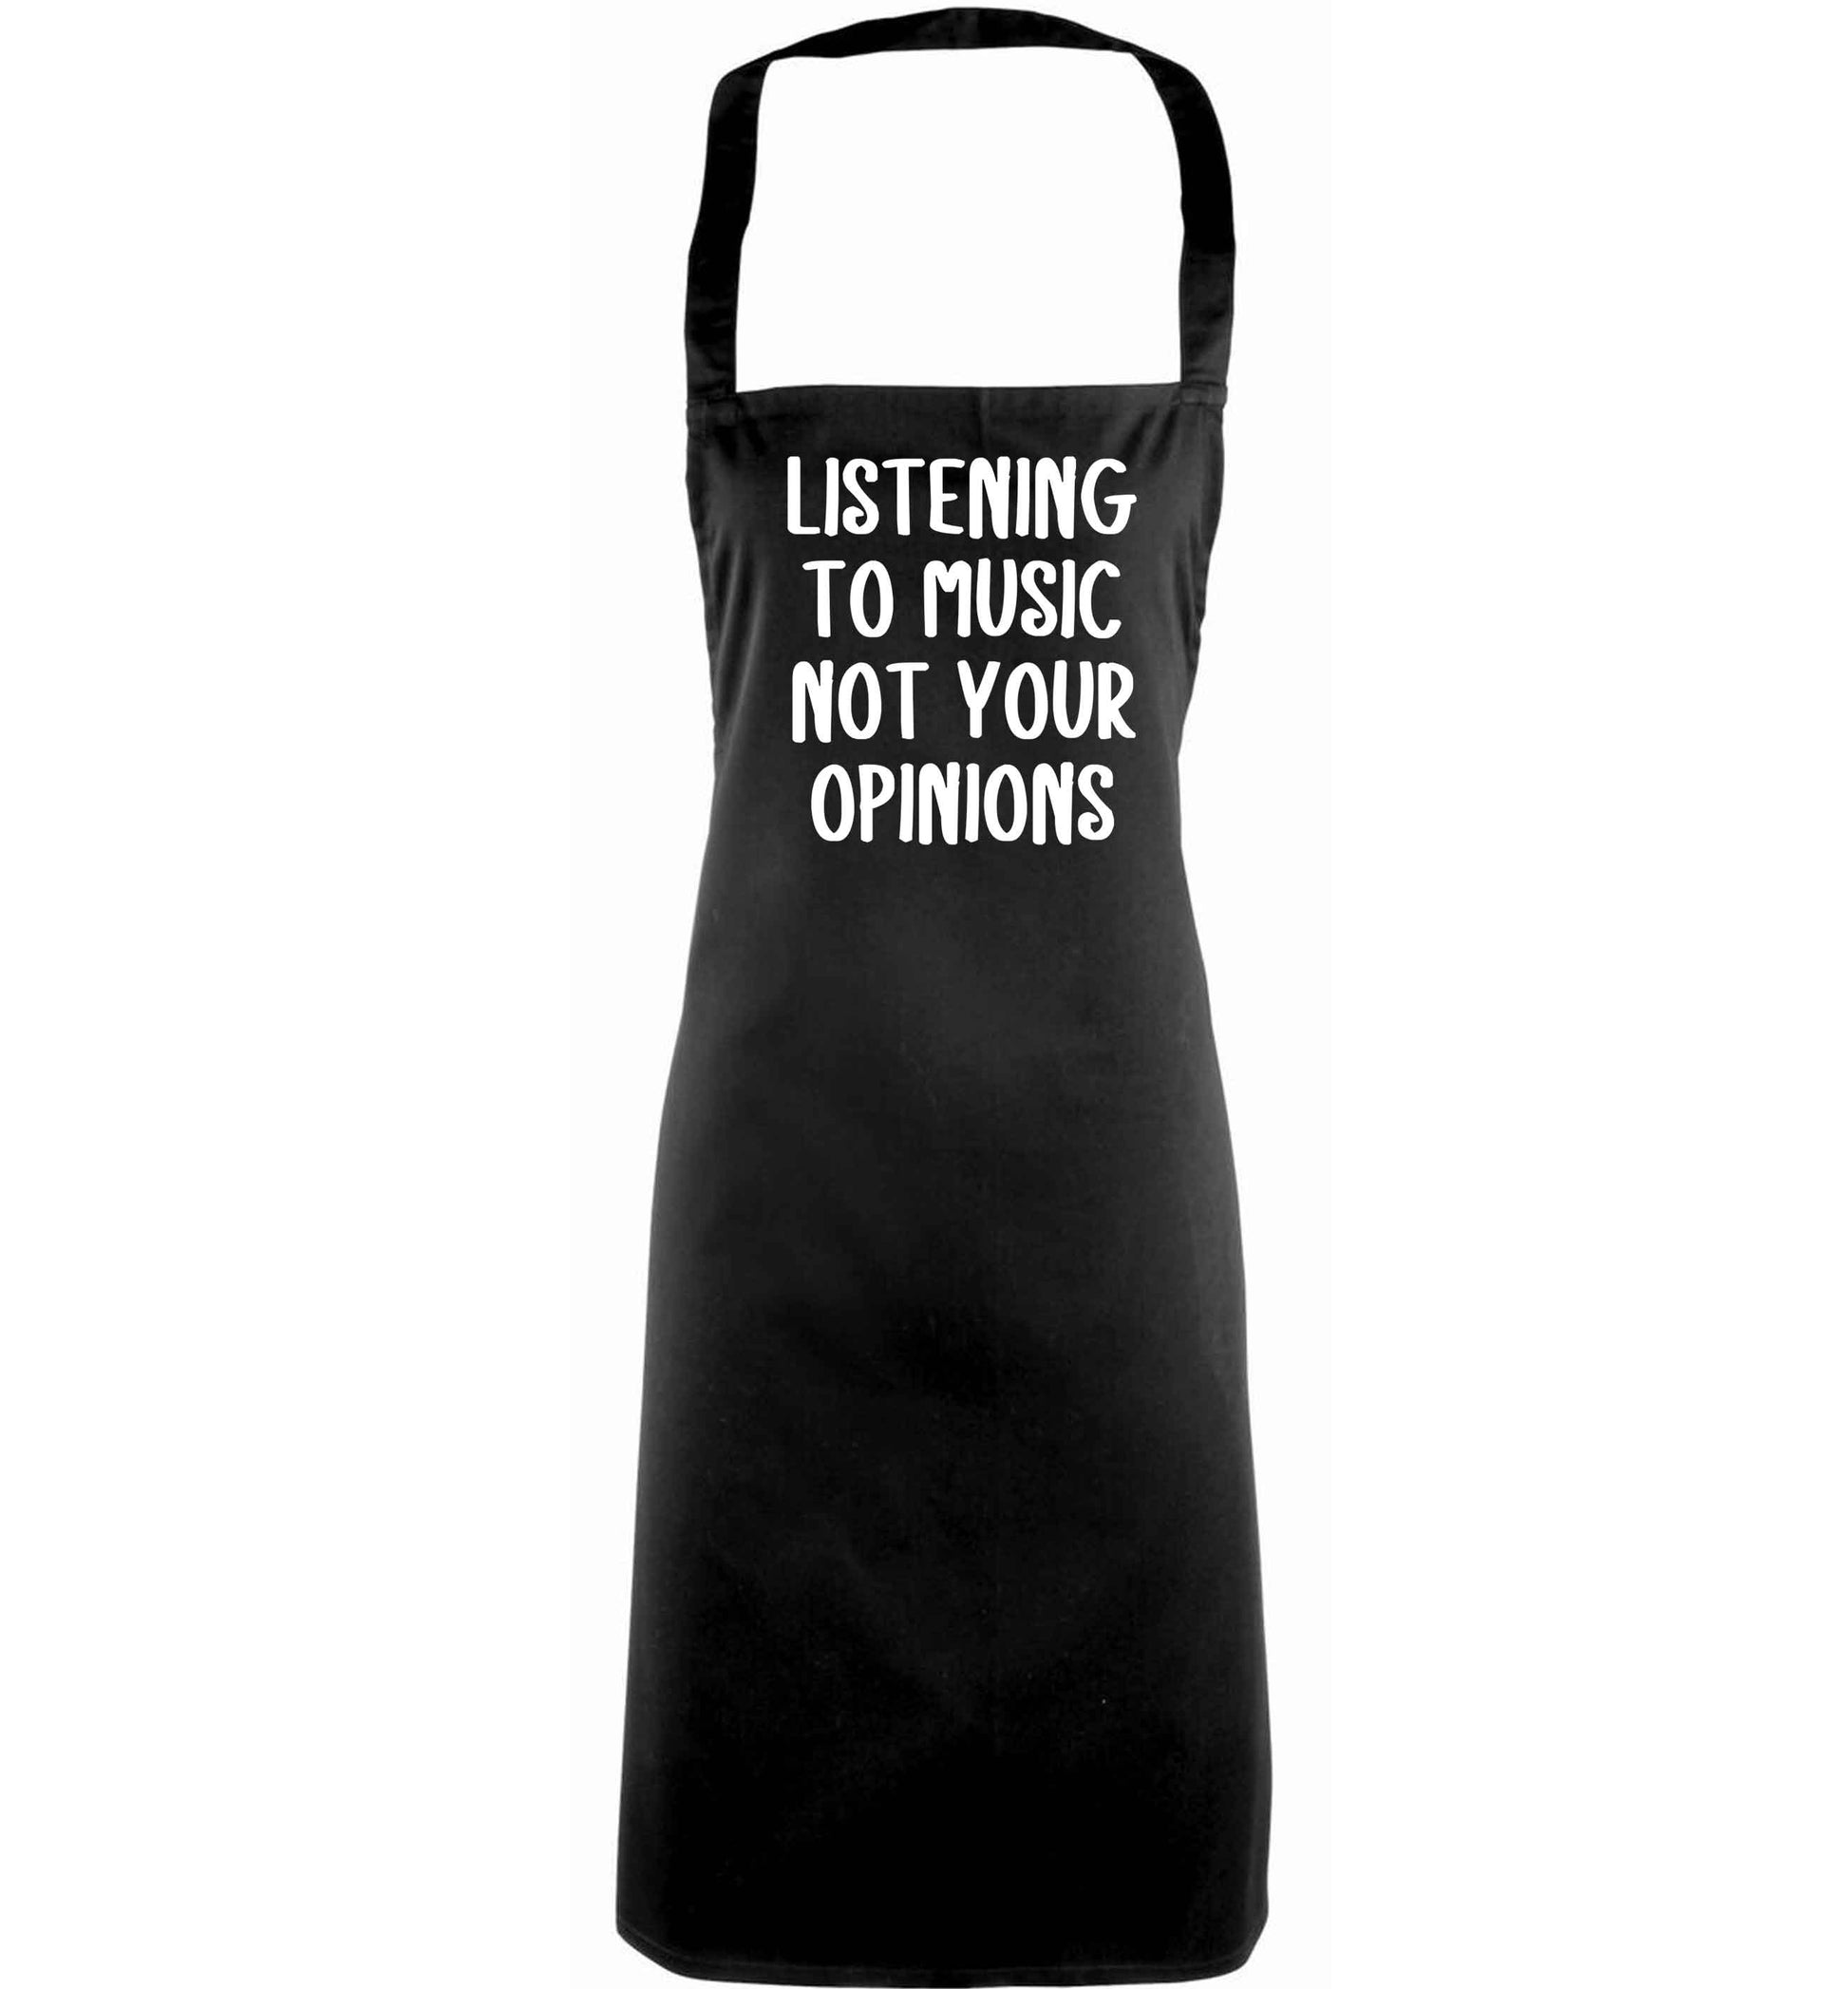 Listening to music not your opinions adults black apron